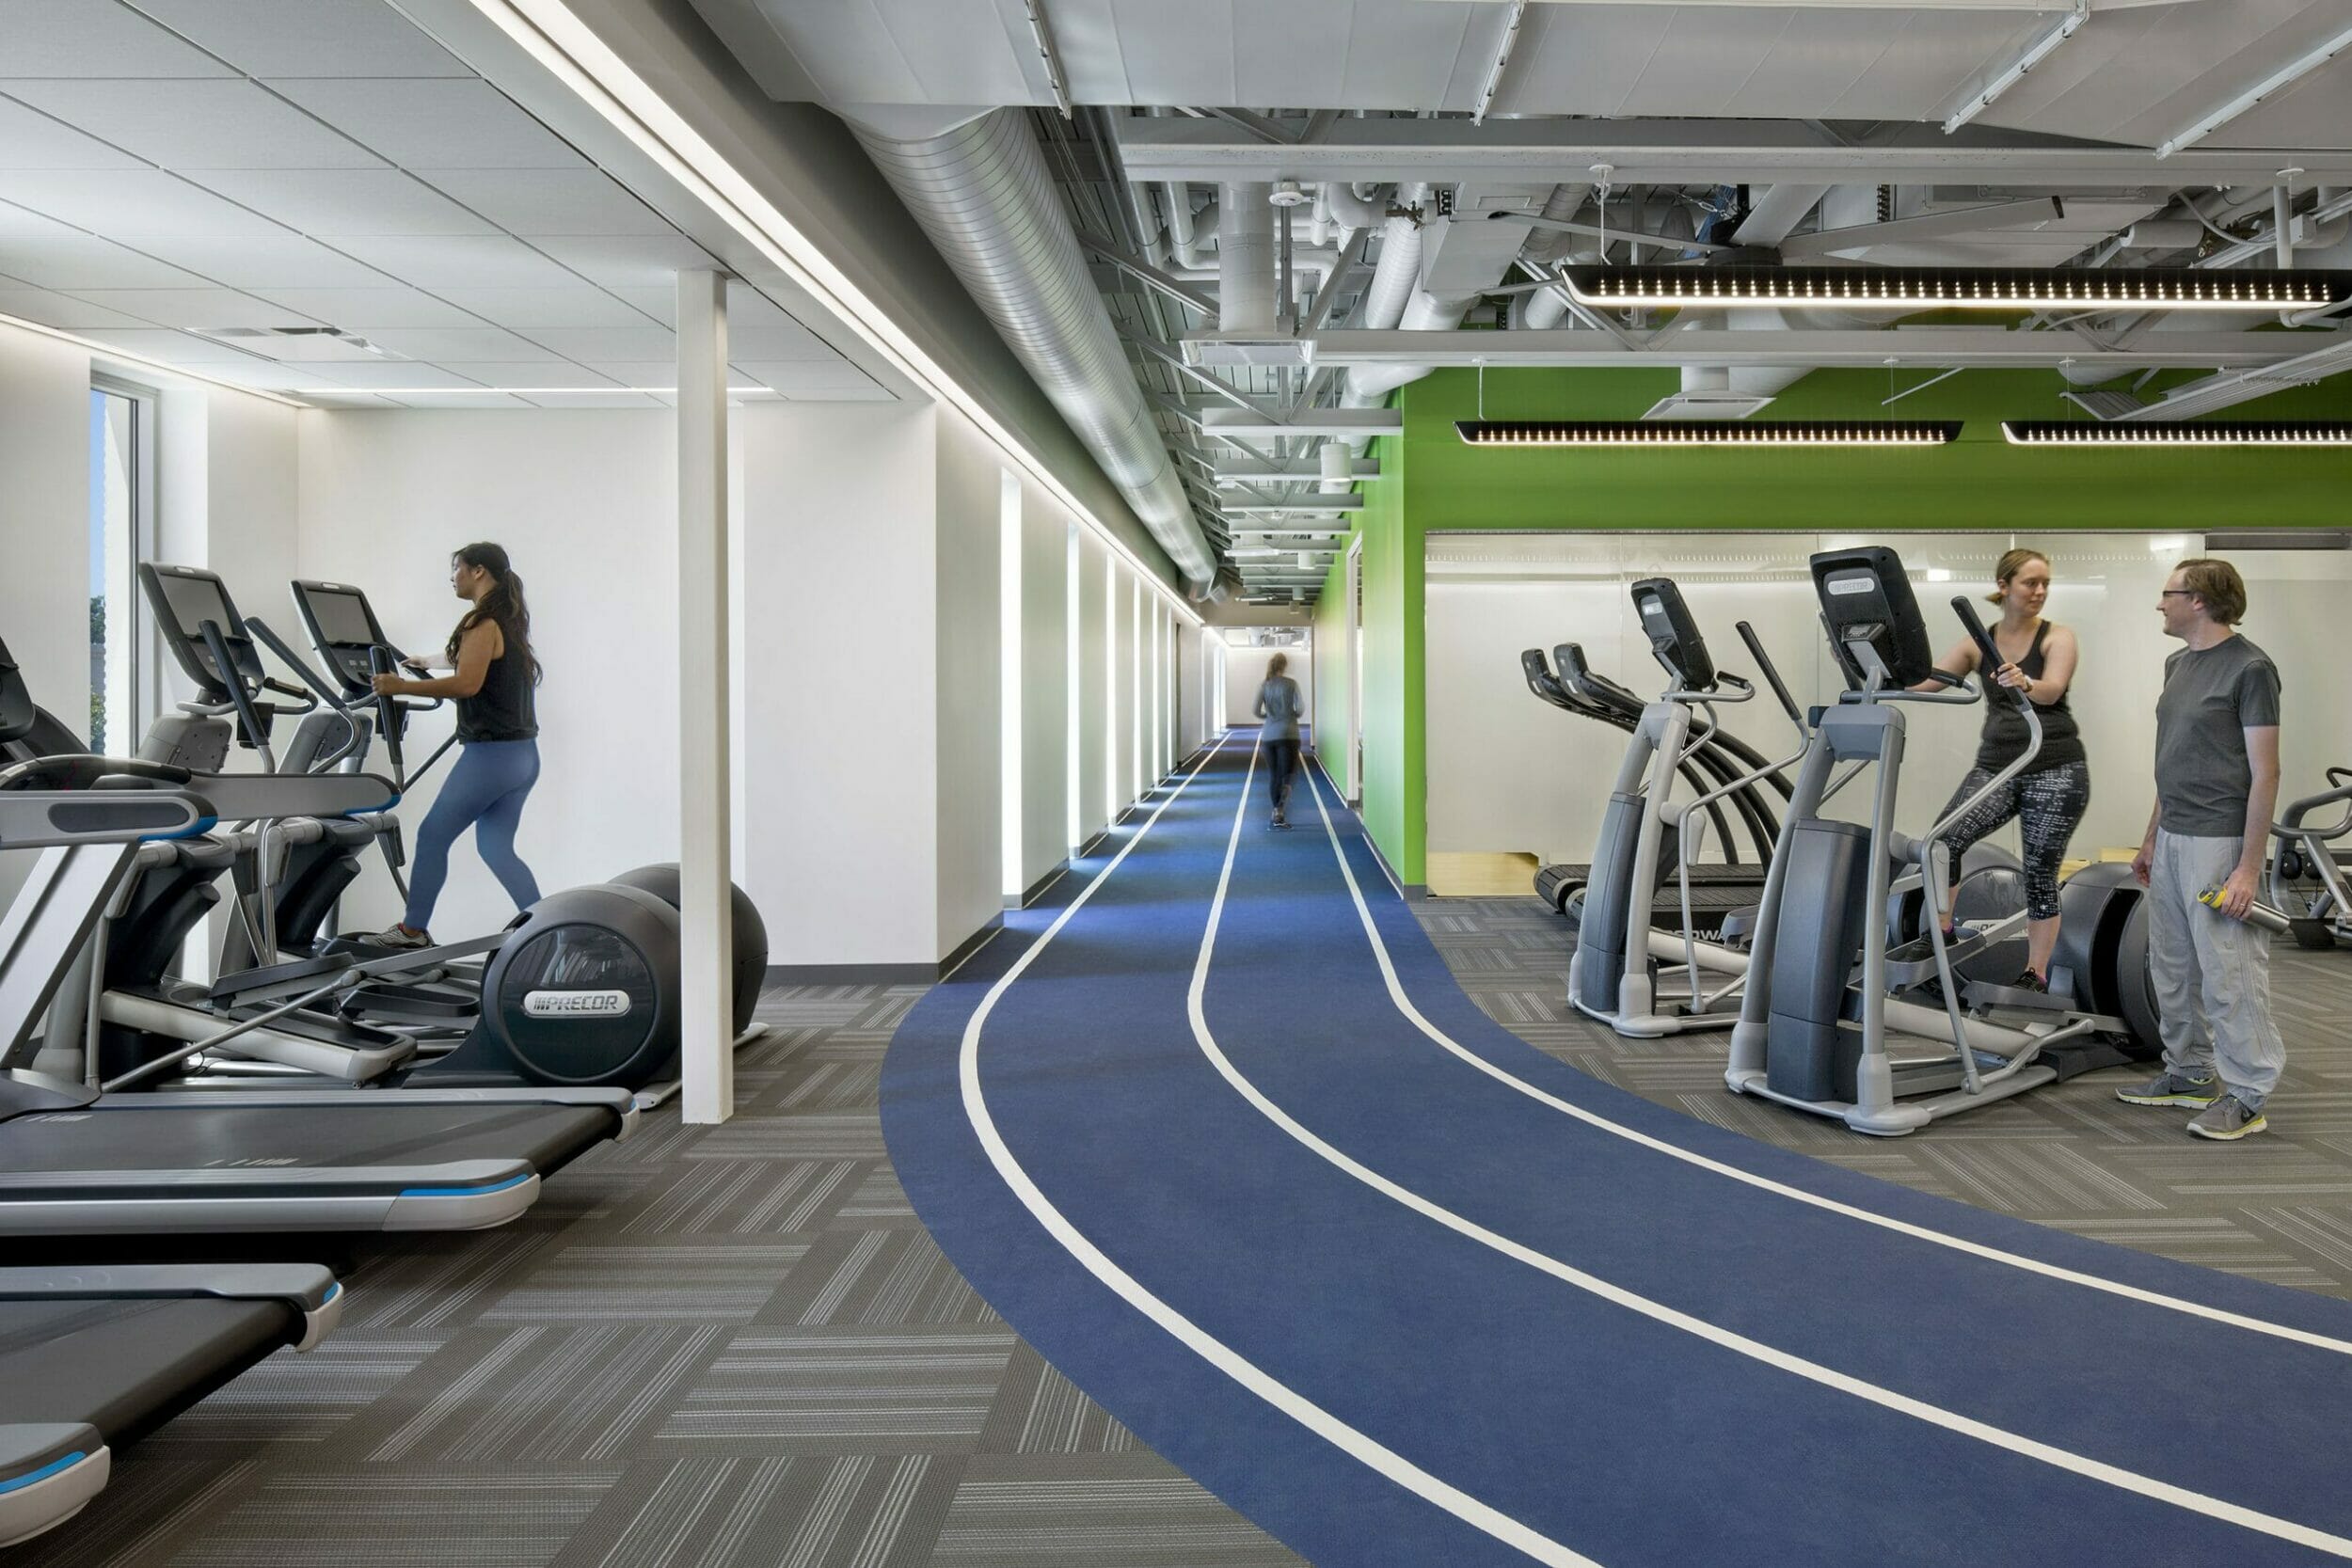 People working out on precor workout machines on either side of a blue running track inside a wellness center